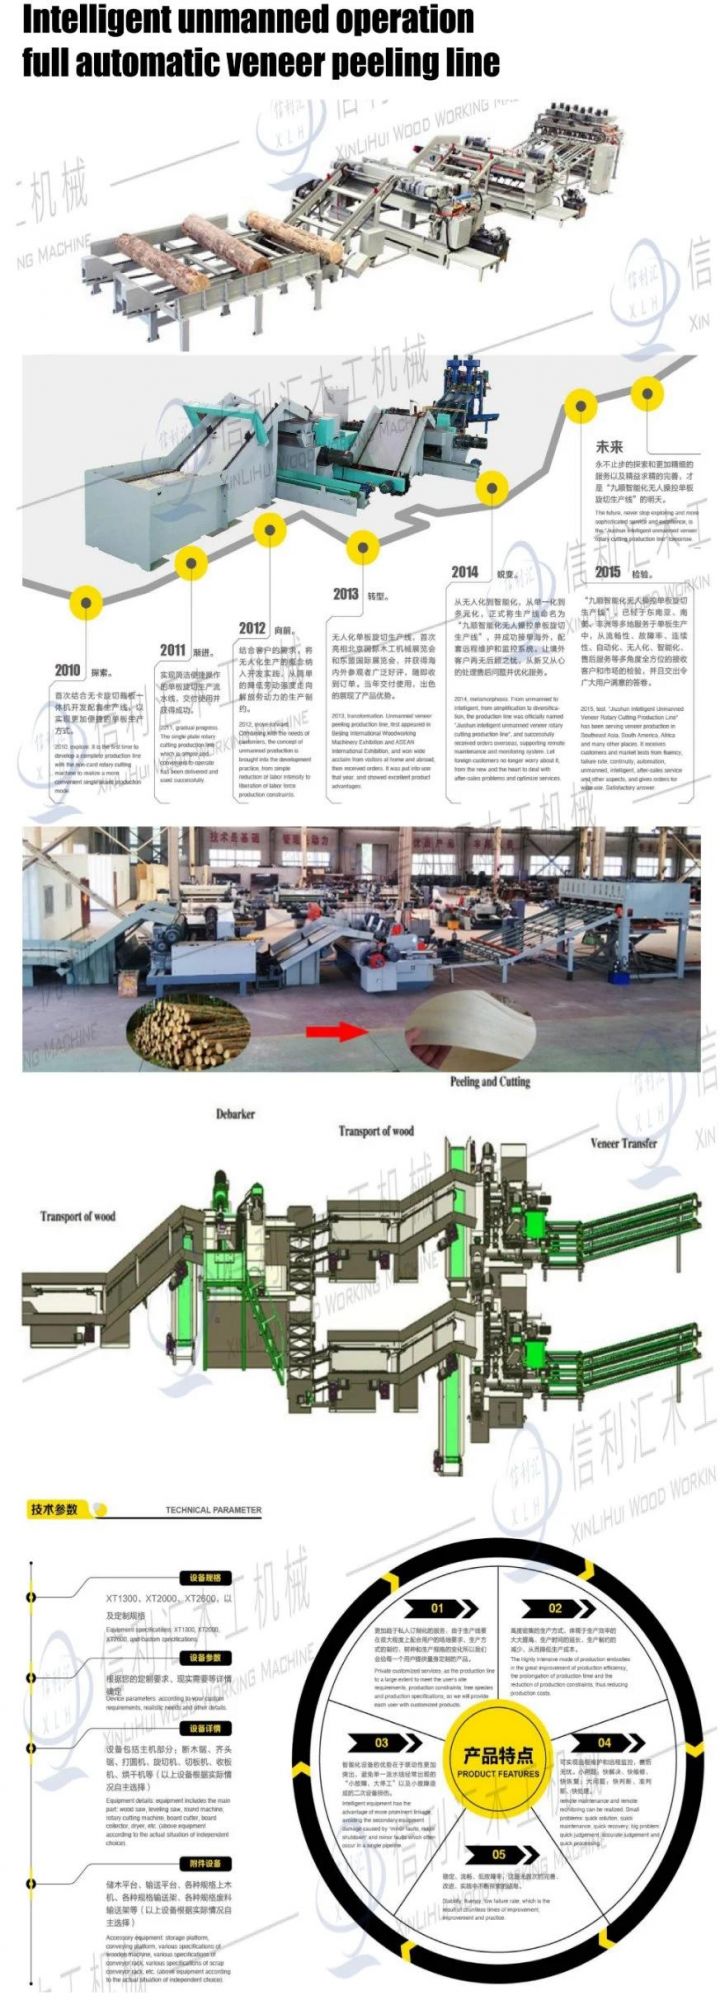 Rotary Veneer Production Line with Dryer and Cut Line Wood Work Machinery Factory to Made MDF Wood From Palm Fronds Palm Trees